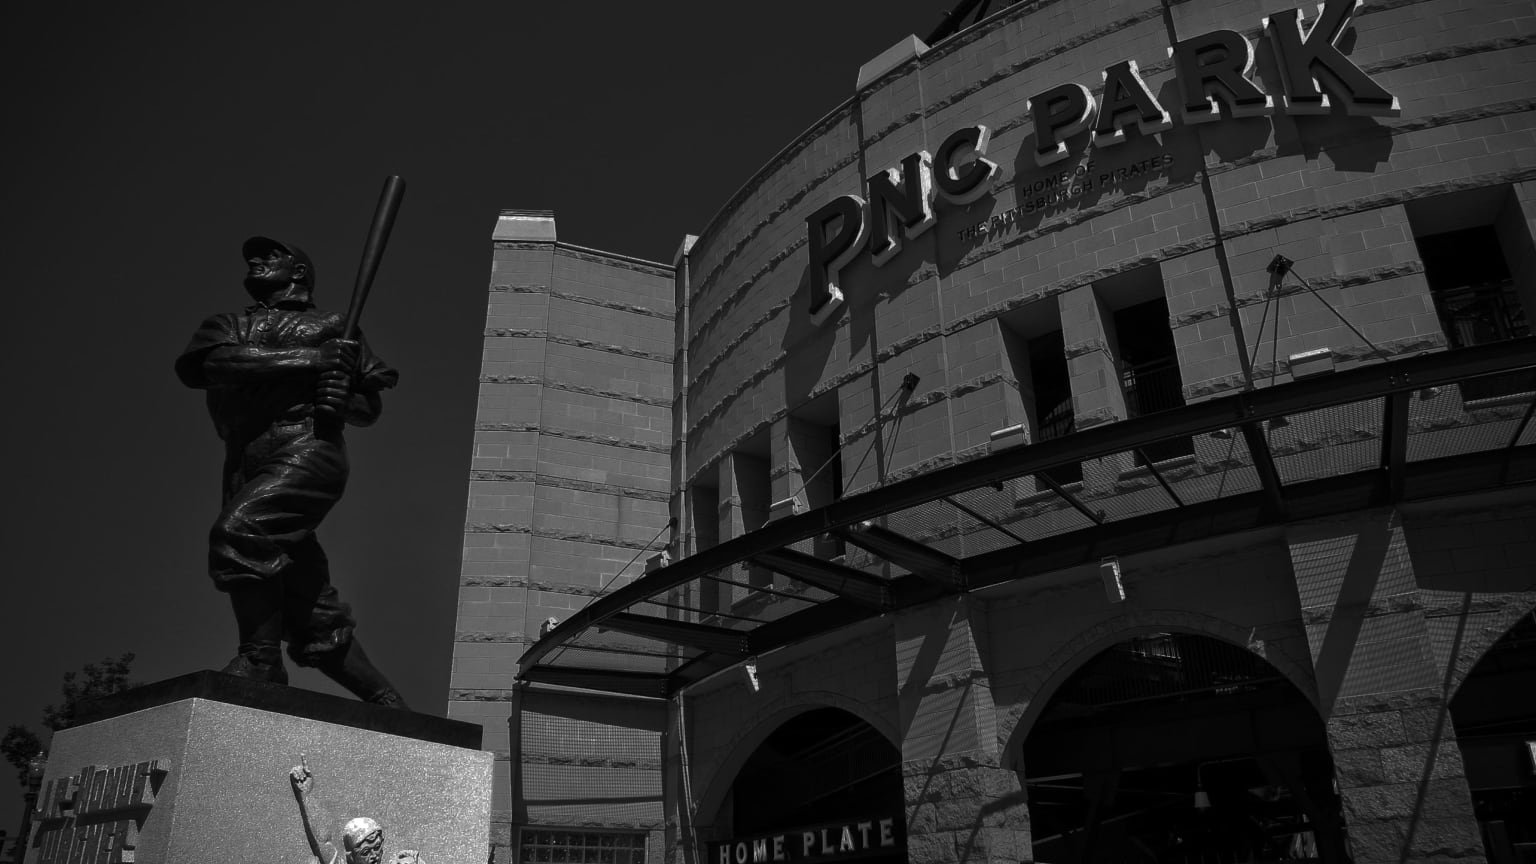 PNC Park Guide – Where to Park, Eat, and Get Cheap Tickets